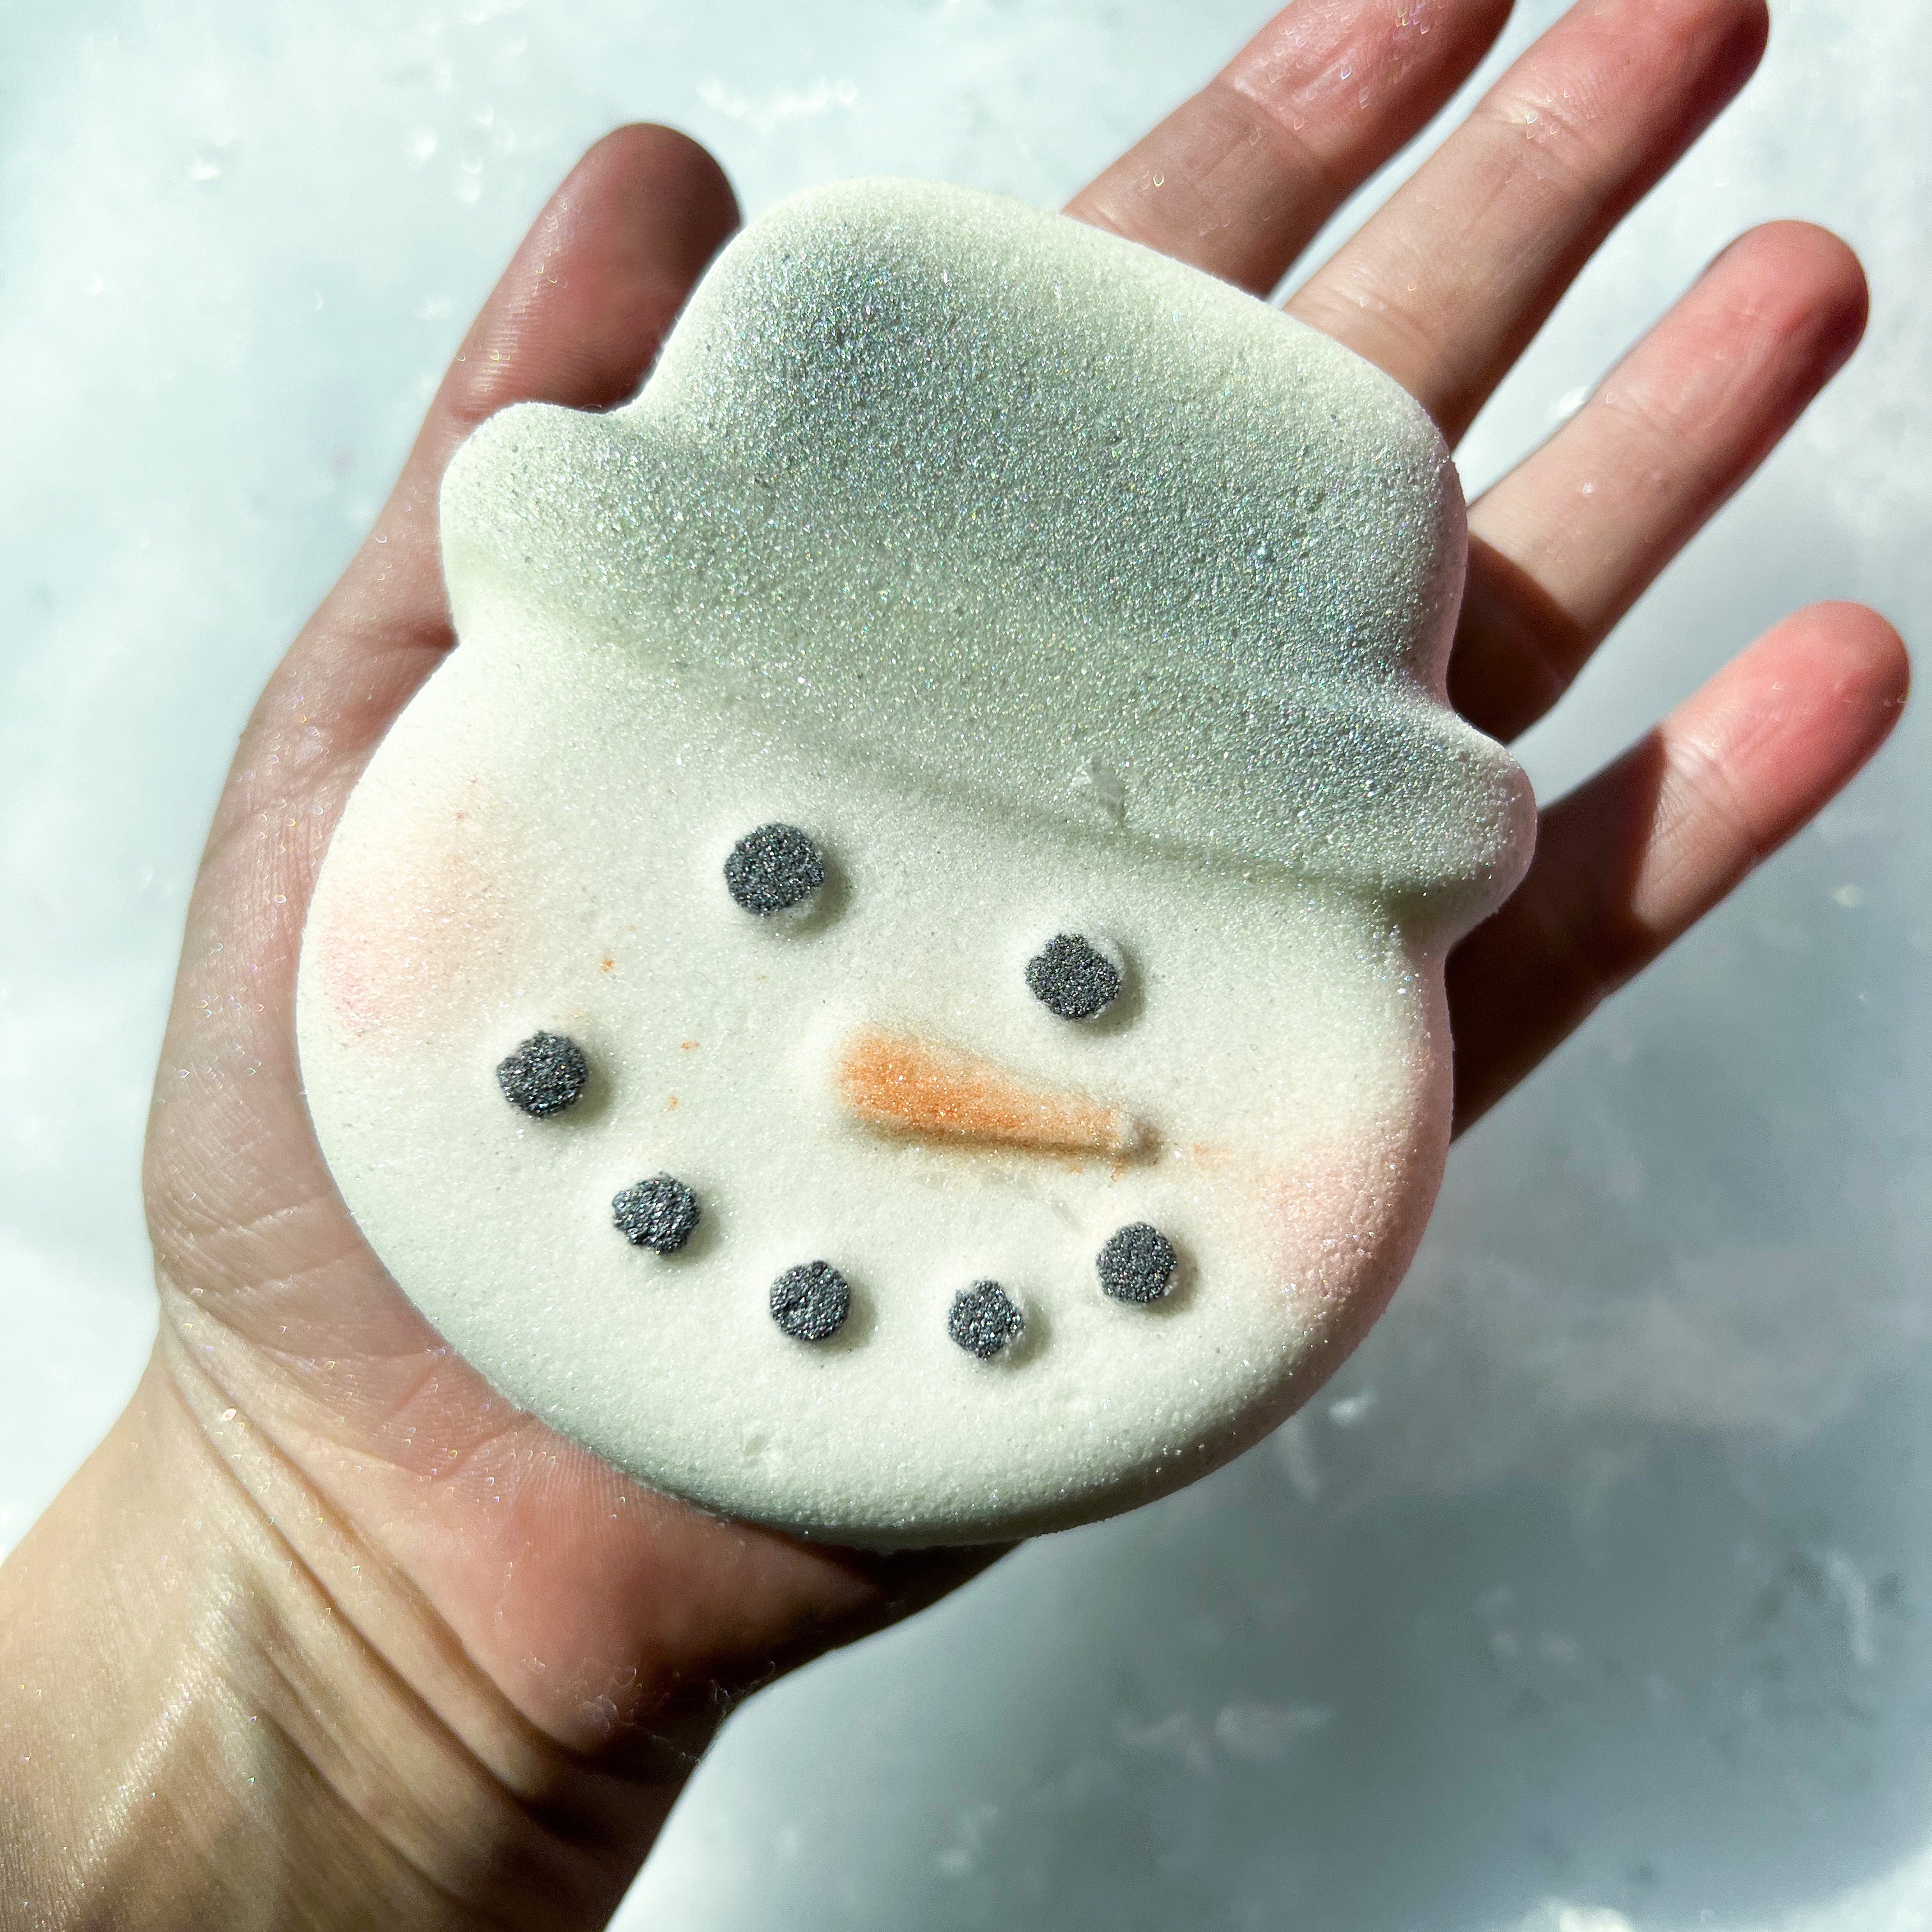 Frosty Delights: Celebrating the Holiday Season with Snowman Spirit Bath Bomb from Crystal Bar Soap